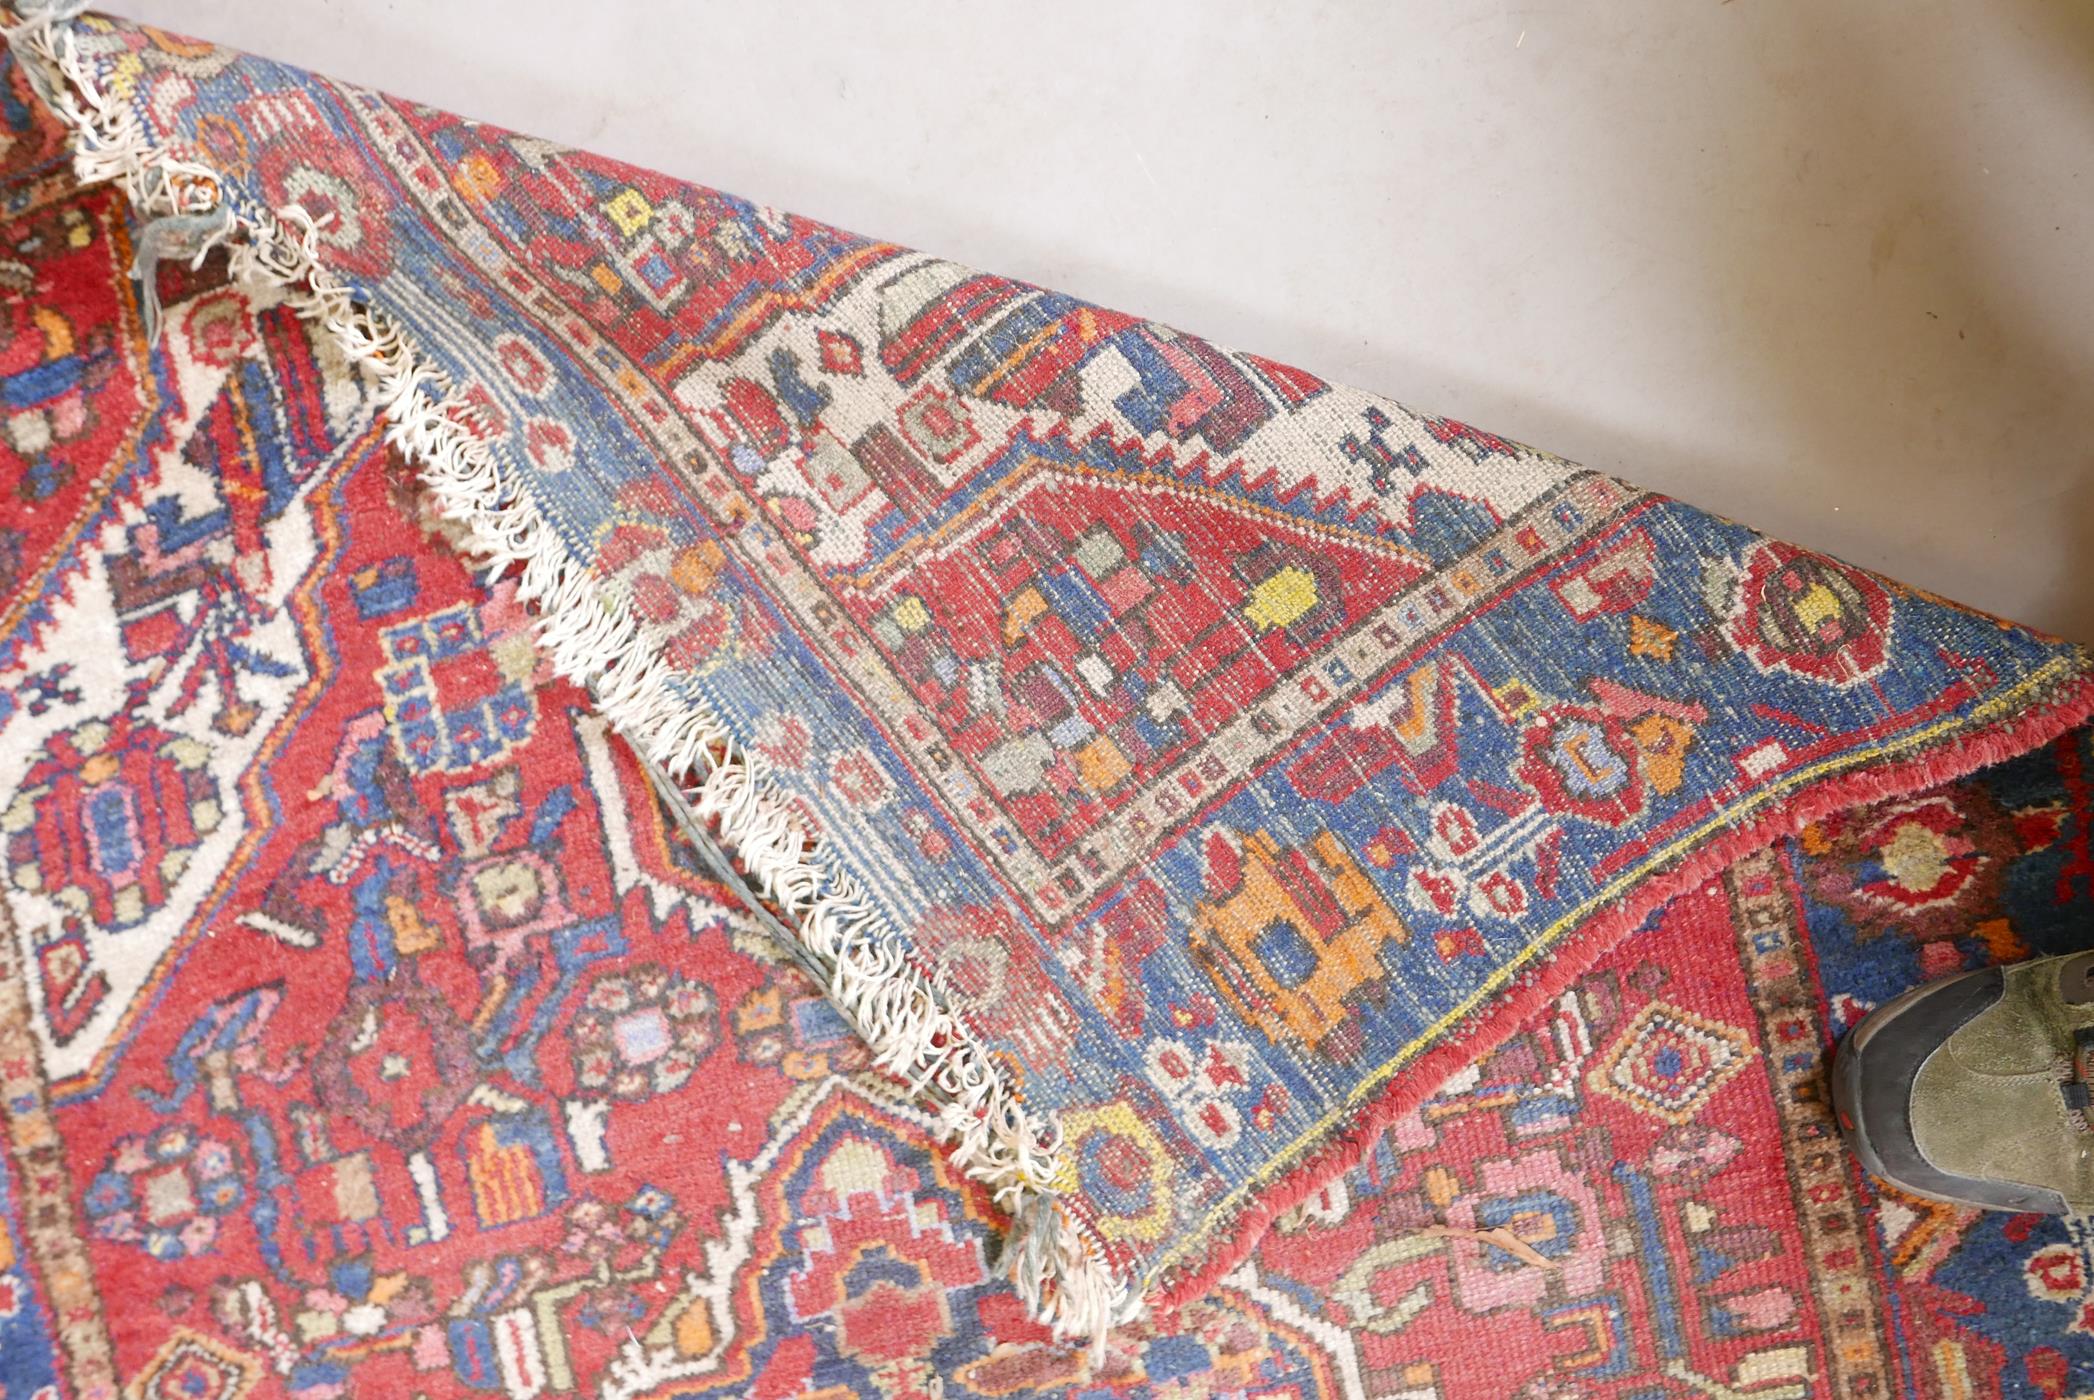 A Persian red ground wool carpet with a central floral medallion design and blue borders, 83" x 52" - Image 3 of 4